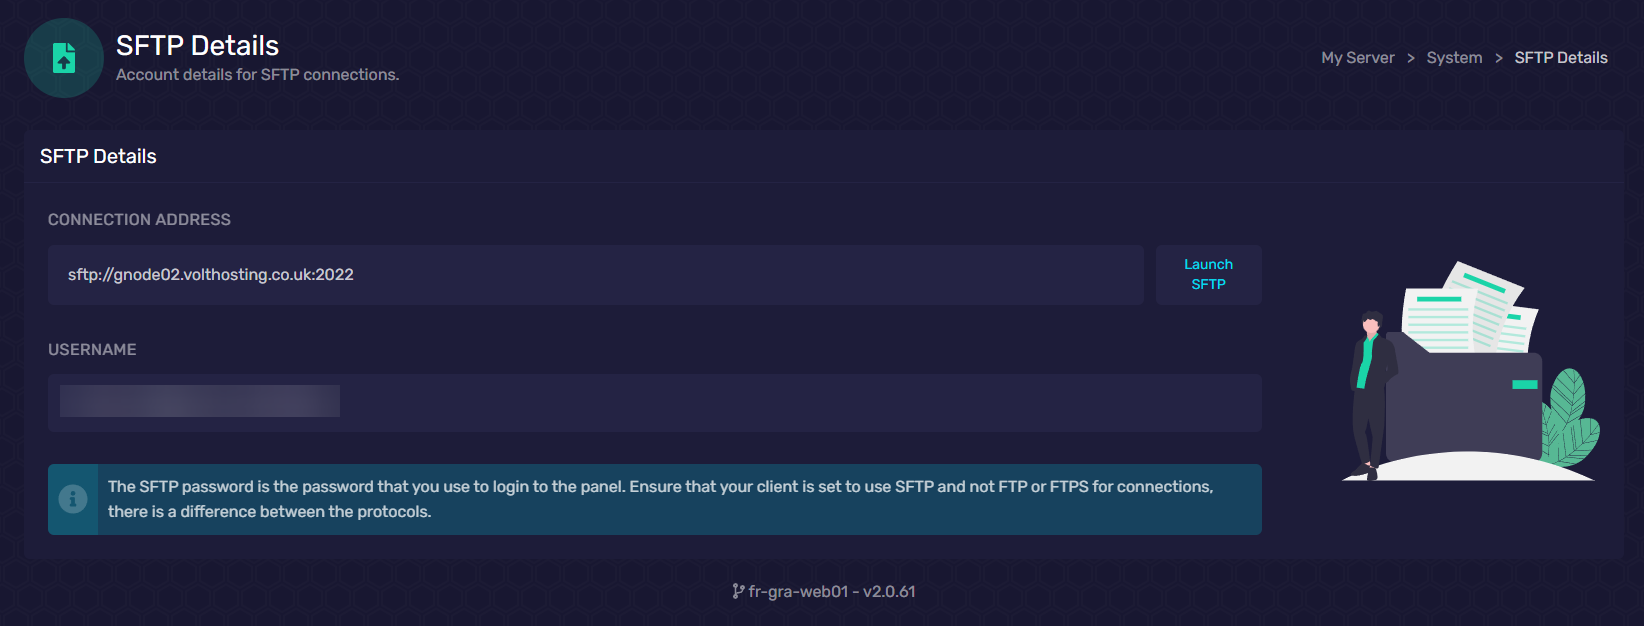 game-panel-sftp-details.png